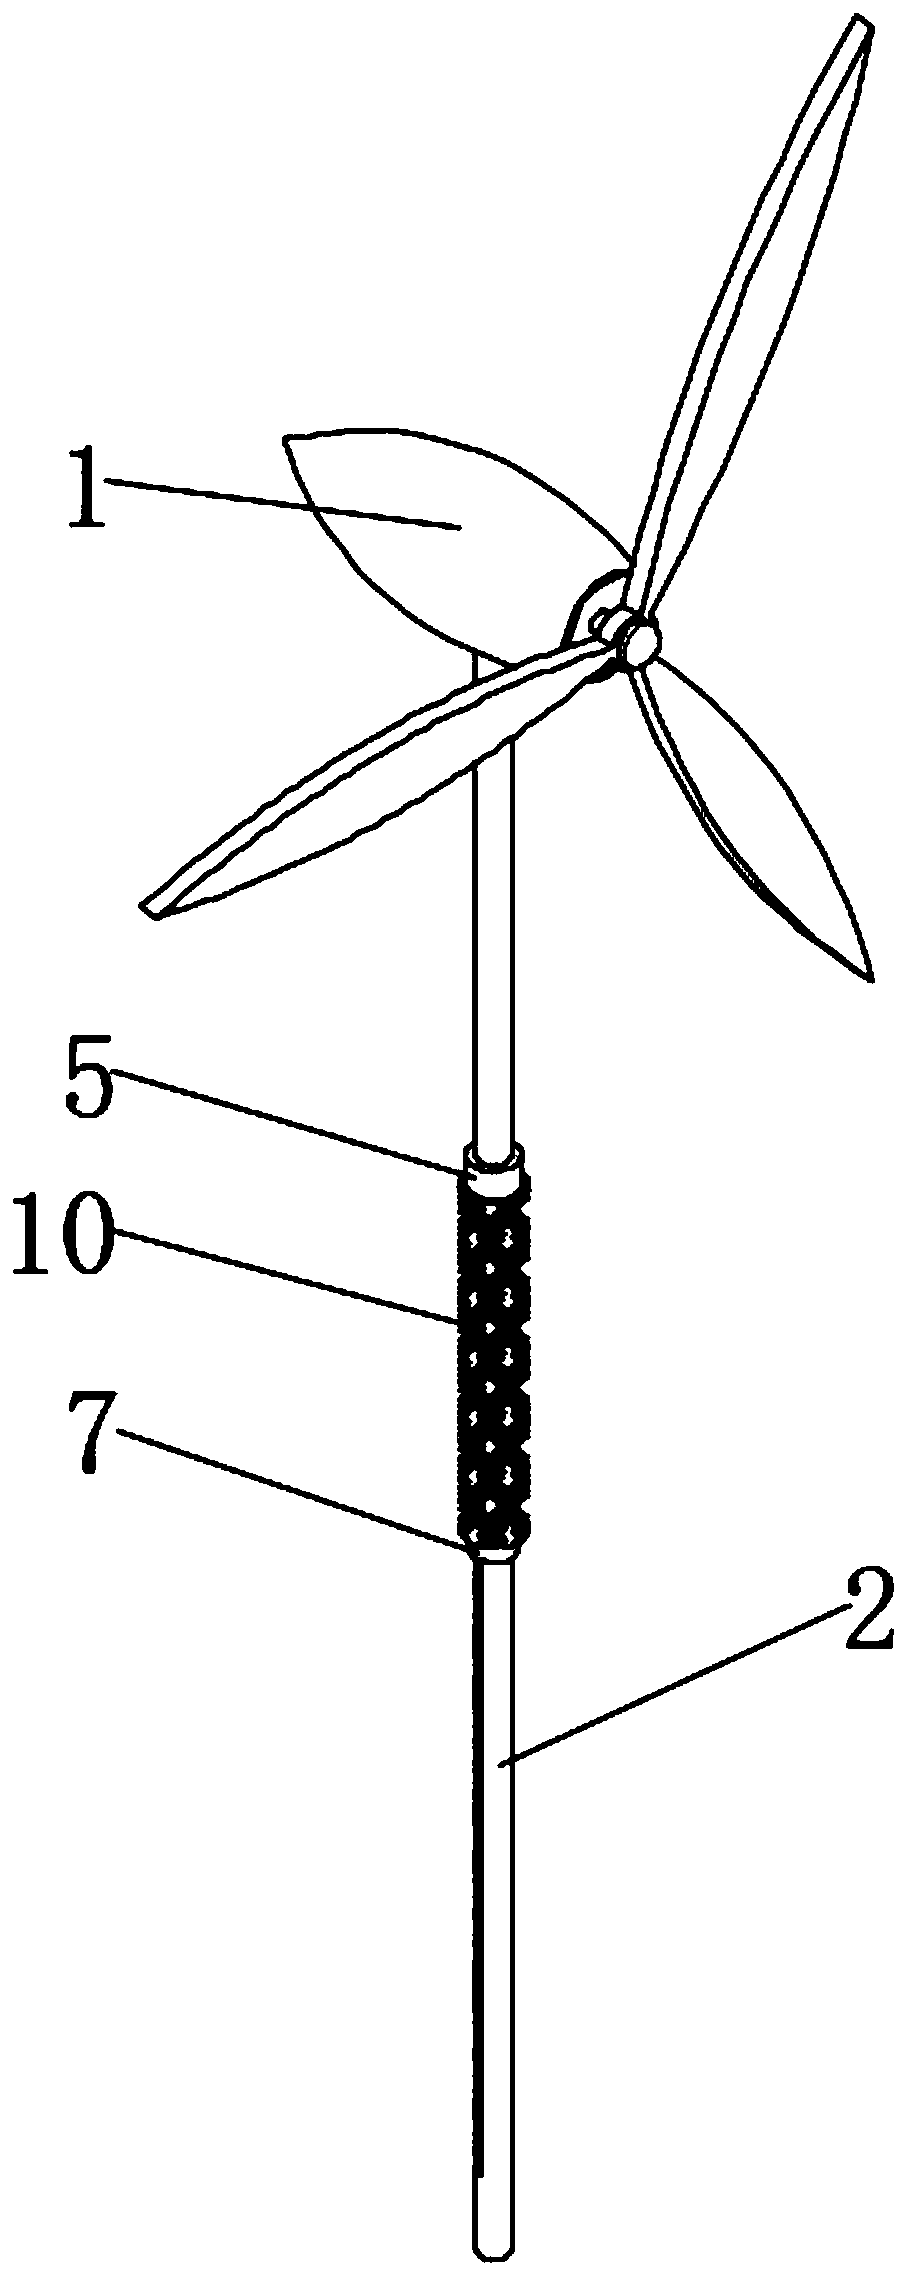 Offshore wind power device applied to areas with abundant tidal energy